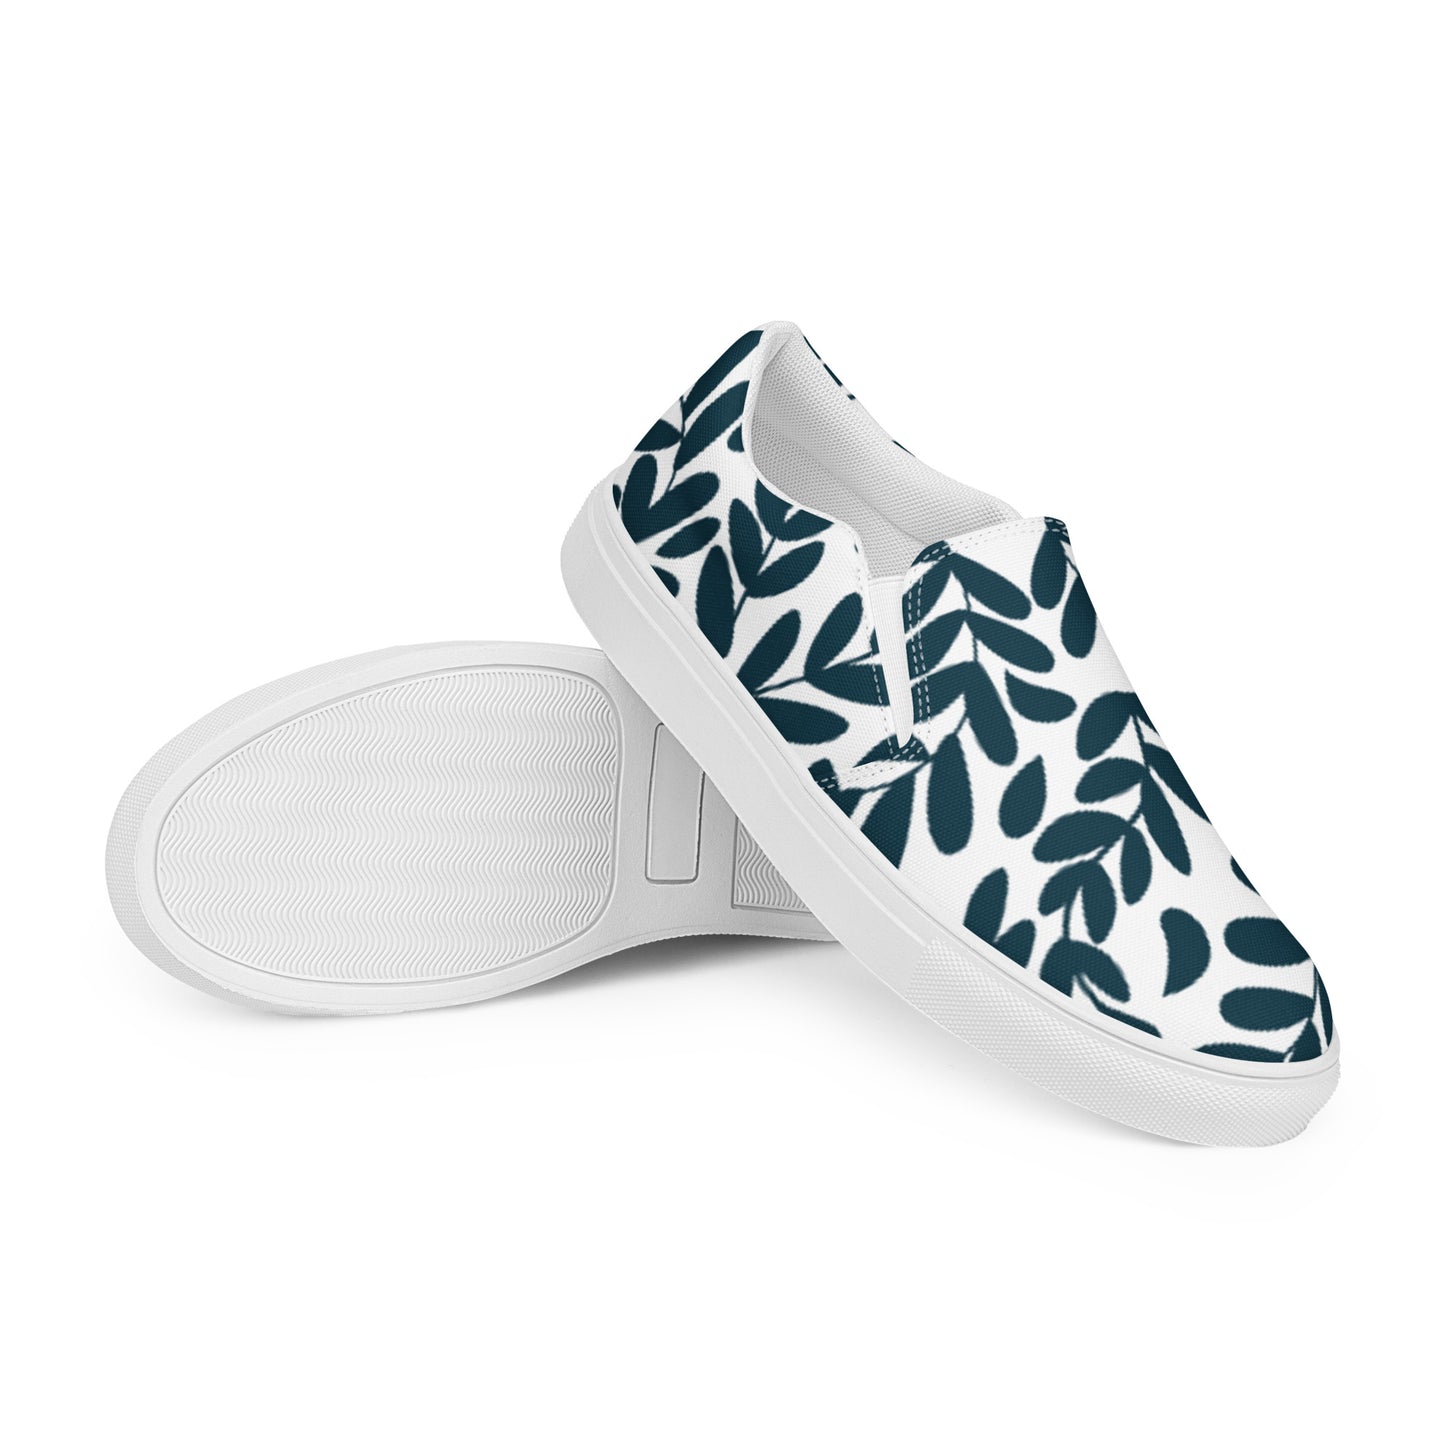 Foliage - Women’s slip-on canvas shoes Womens Slip On Shoes